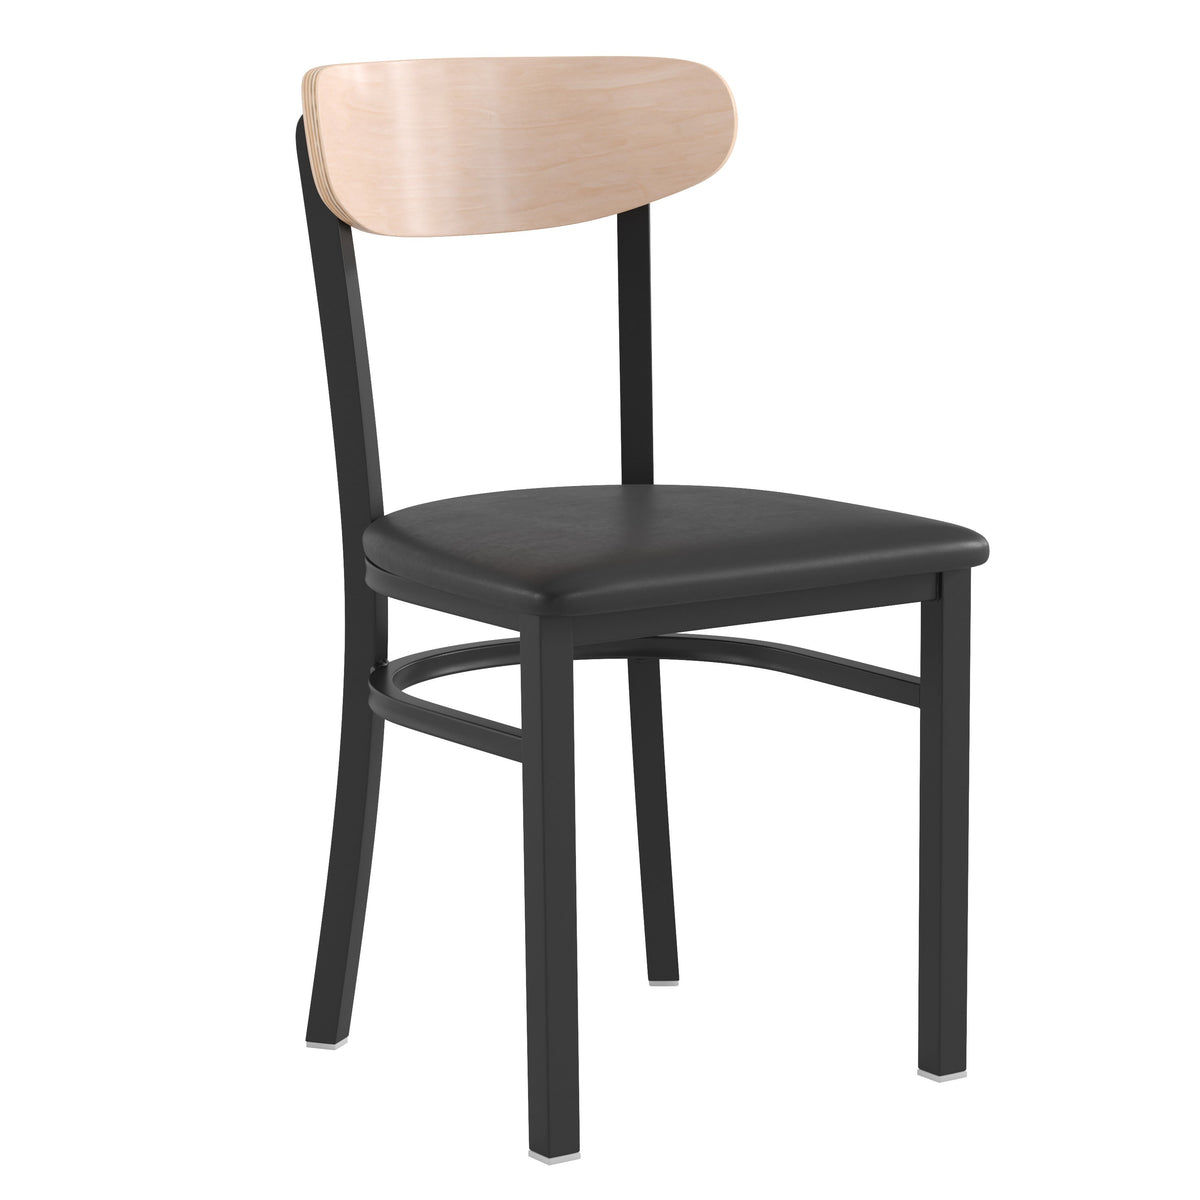 Natural Birch Wood Back/Black Vinyl Seat |#| Commercial Metal Dining Chair with Vinyl Seat-Wood Boomerang Back-Black/Natural